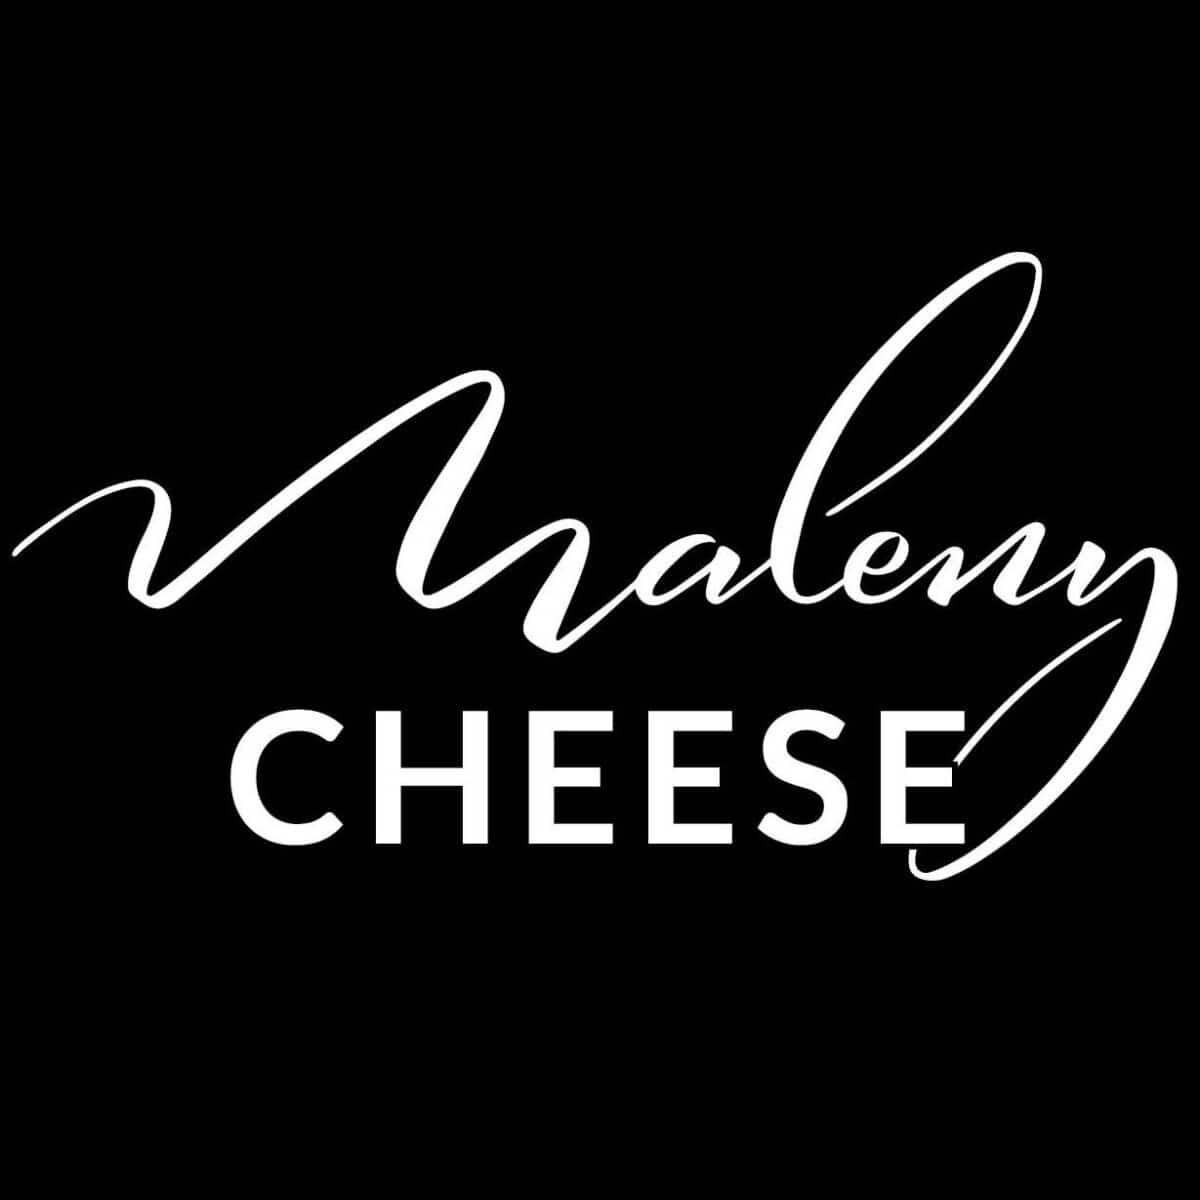 Malenycheese